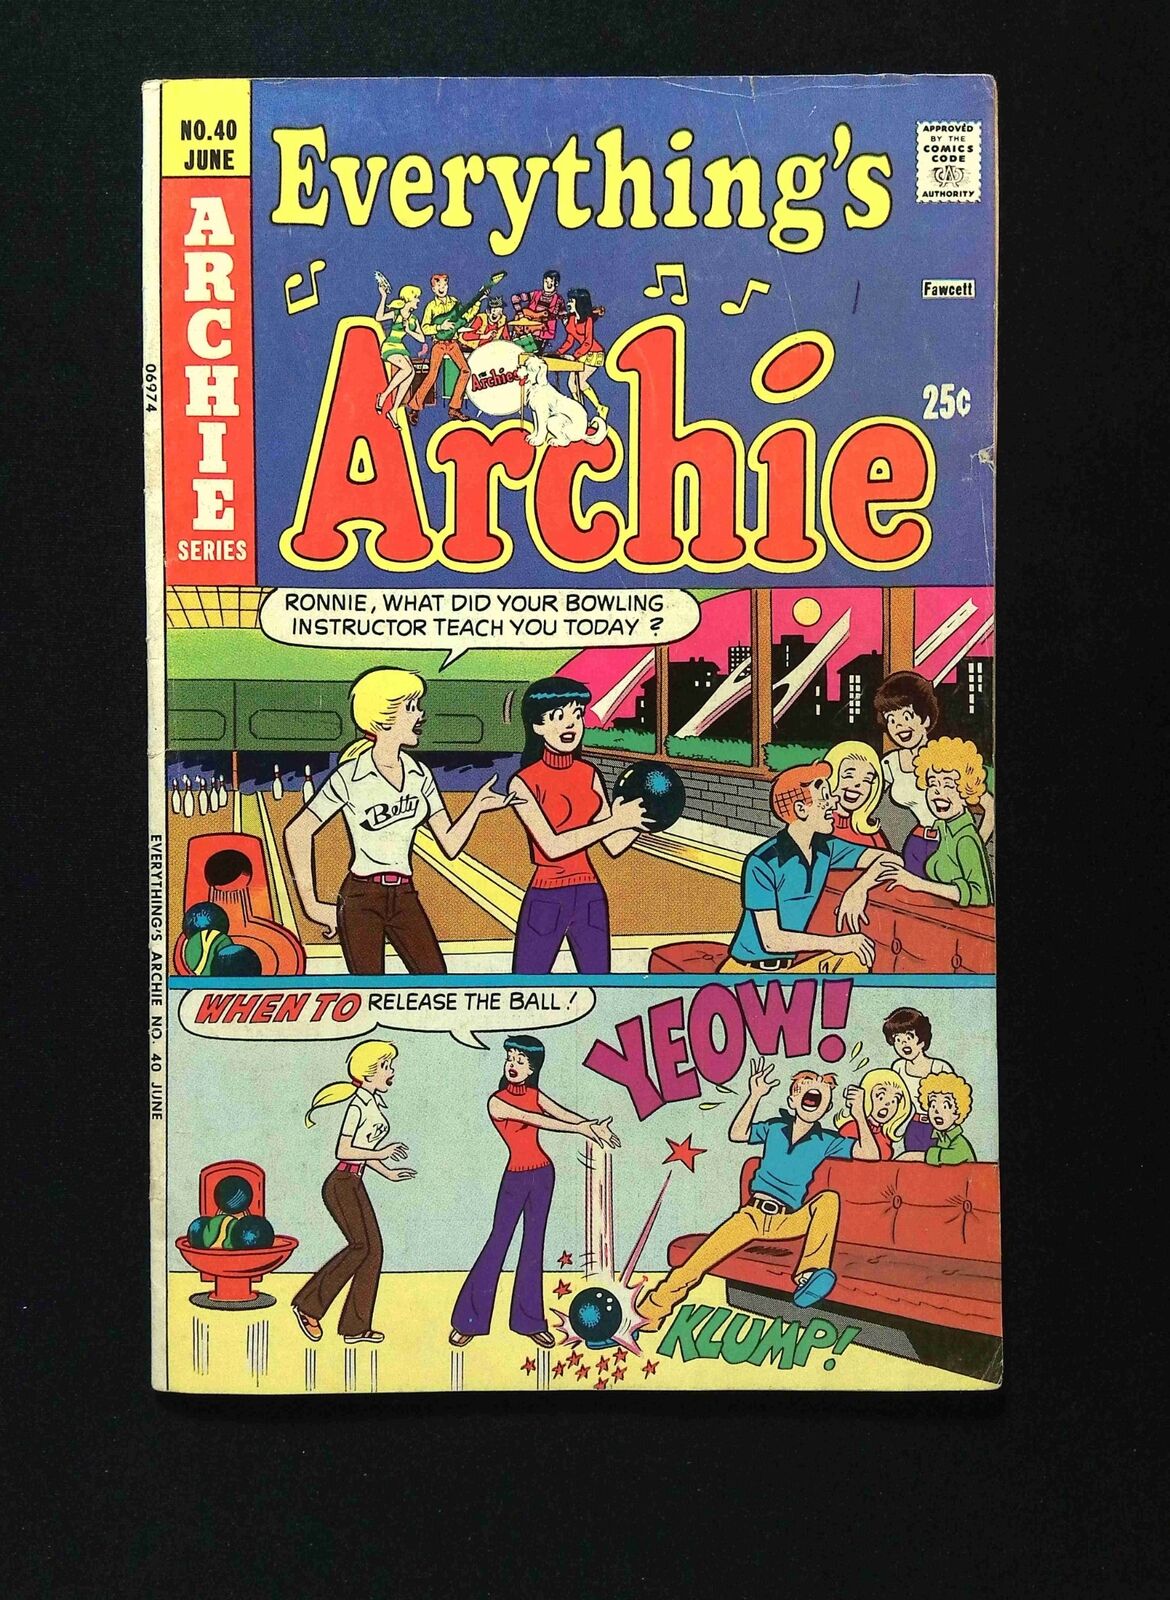 Everything's Archie #40  ARCHIE Comics 1975 FN